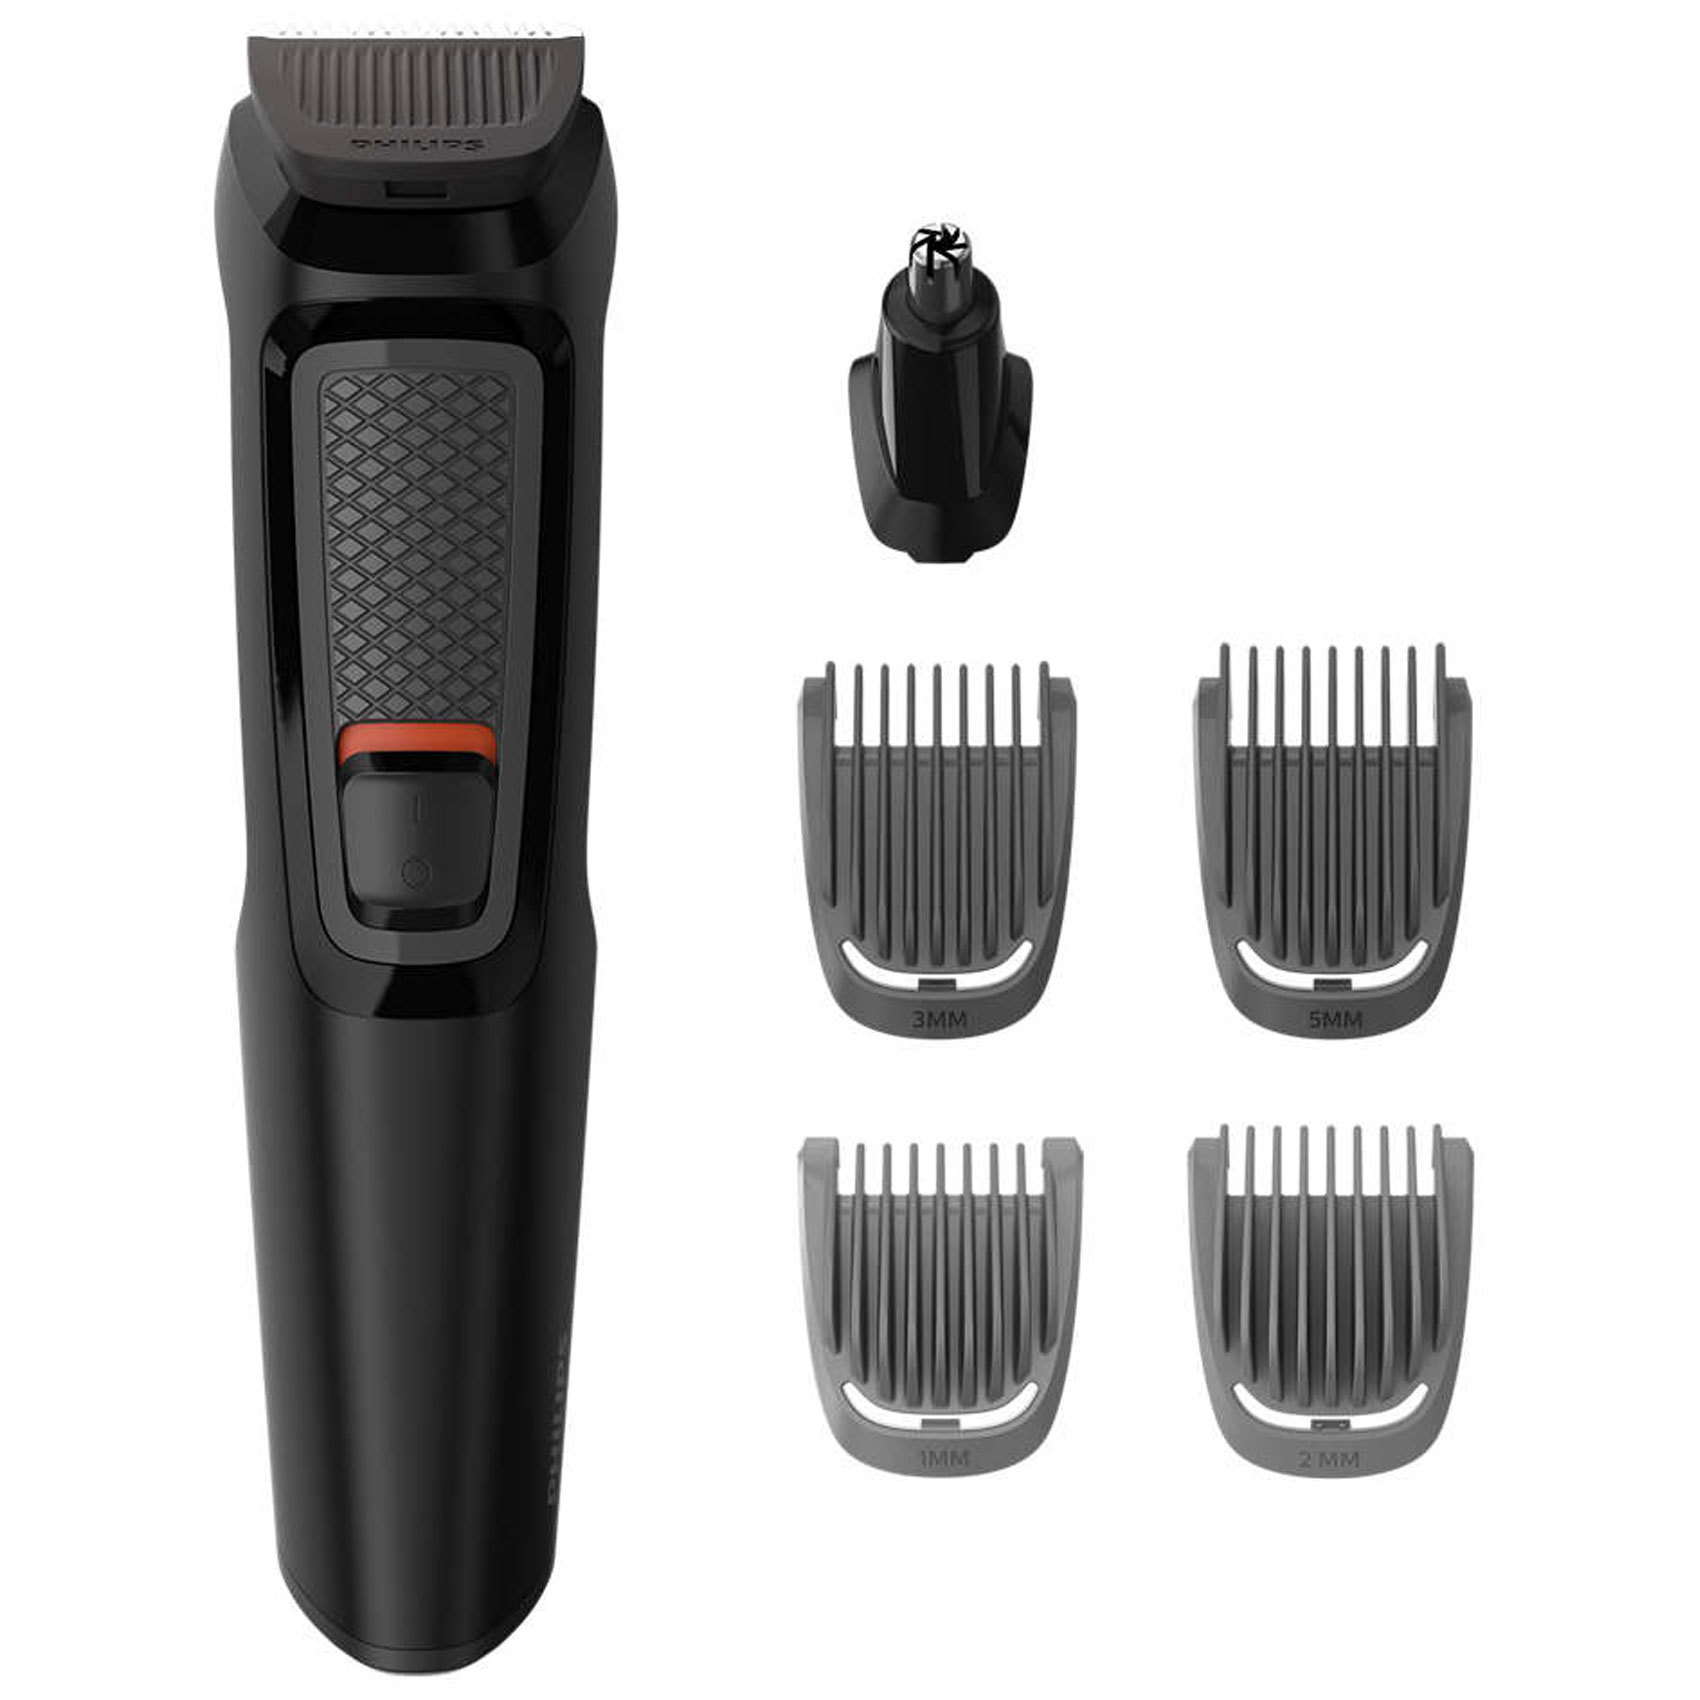 philips trimmer official site